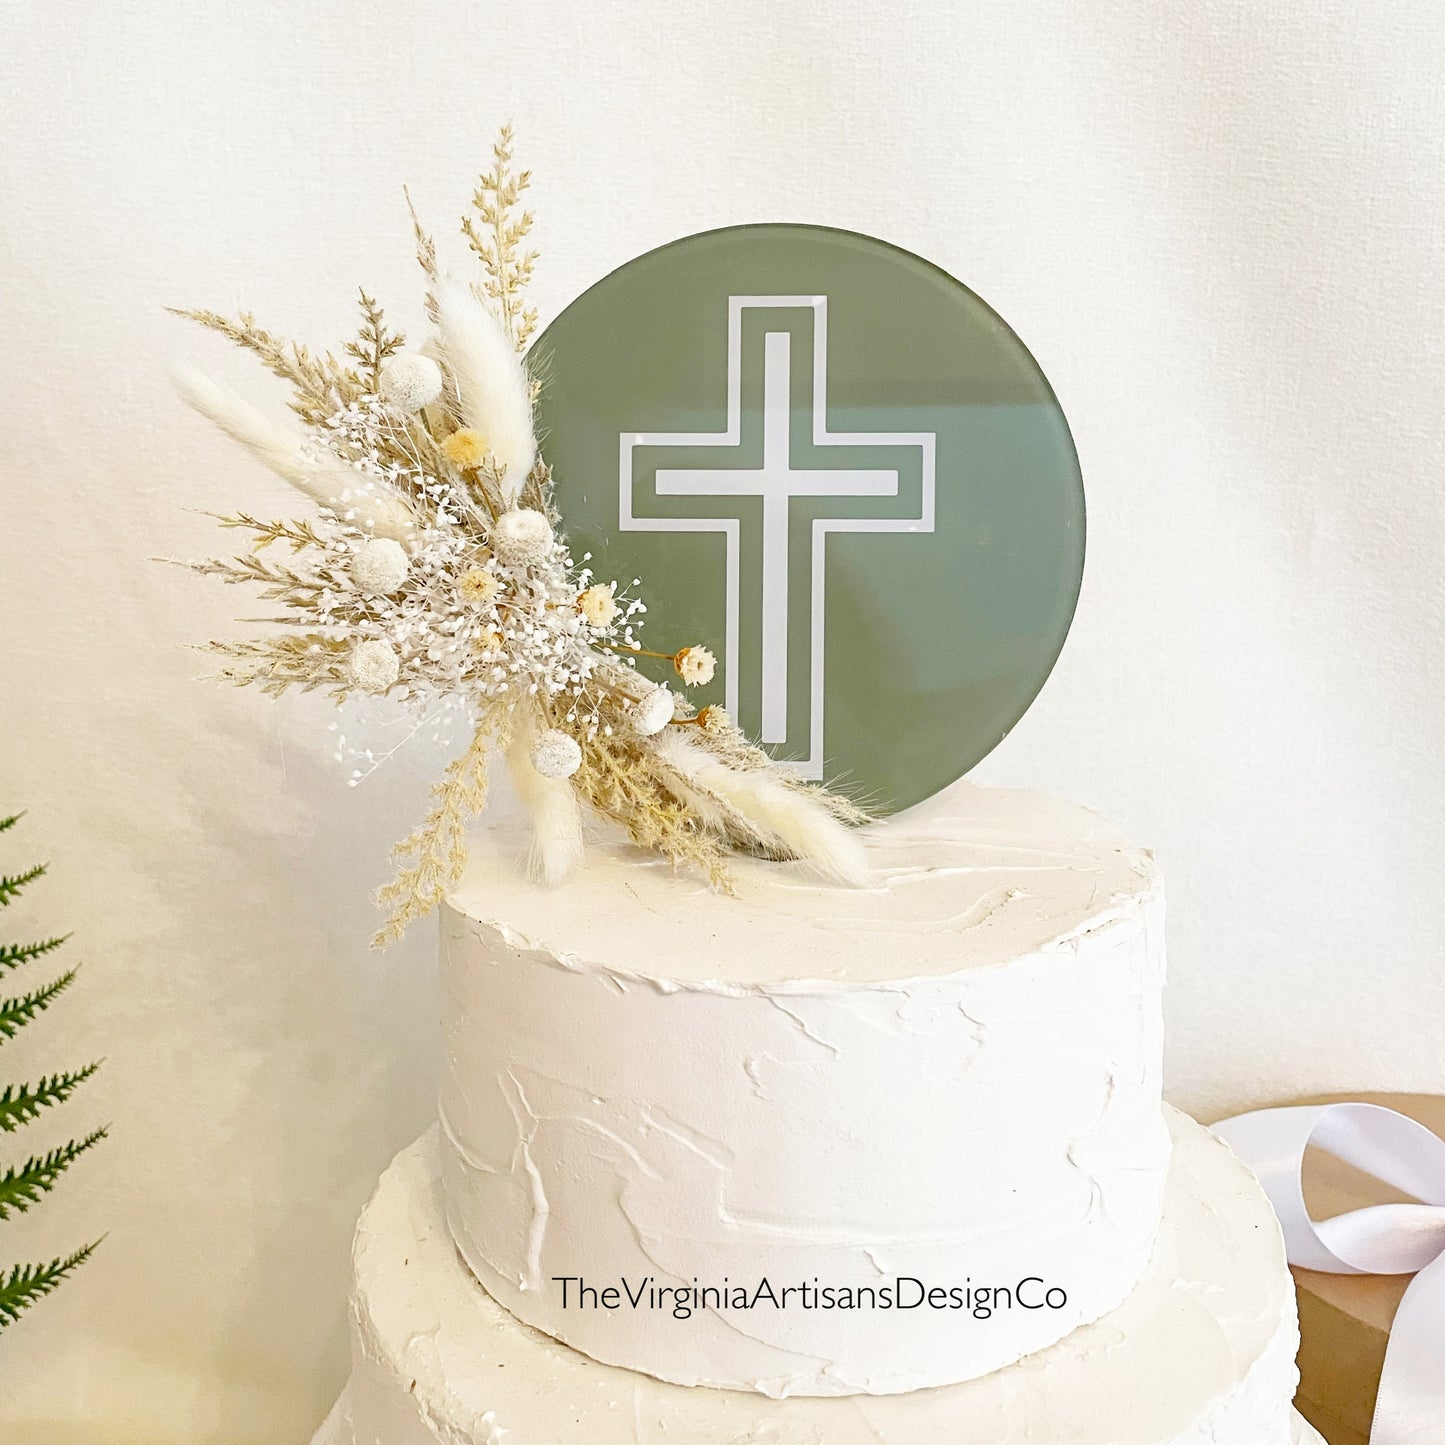 Round Acrylic Cake Topper - Dried Flowers - Baptism - Christening